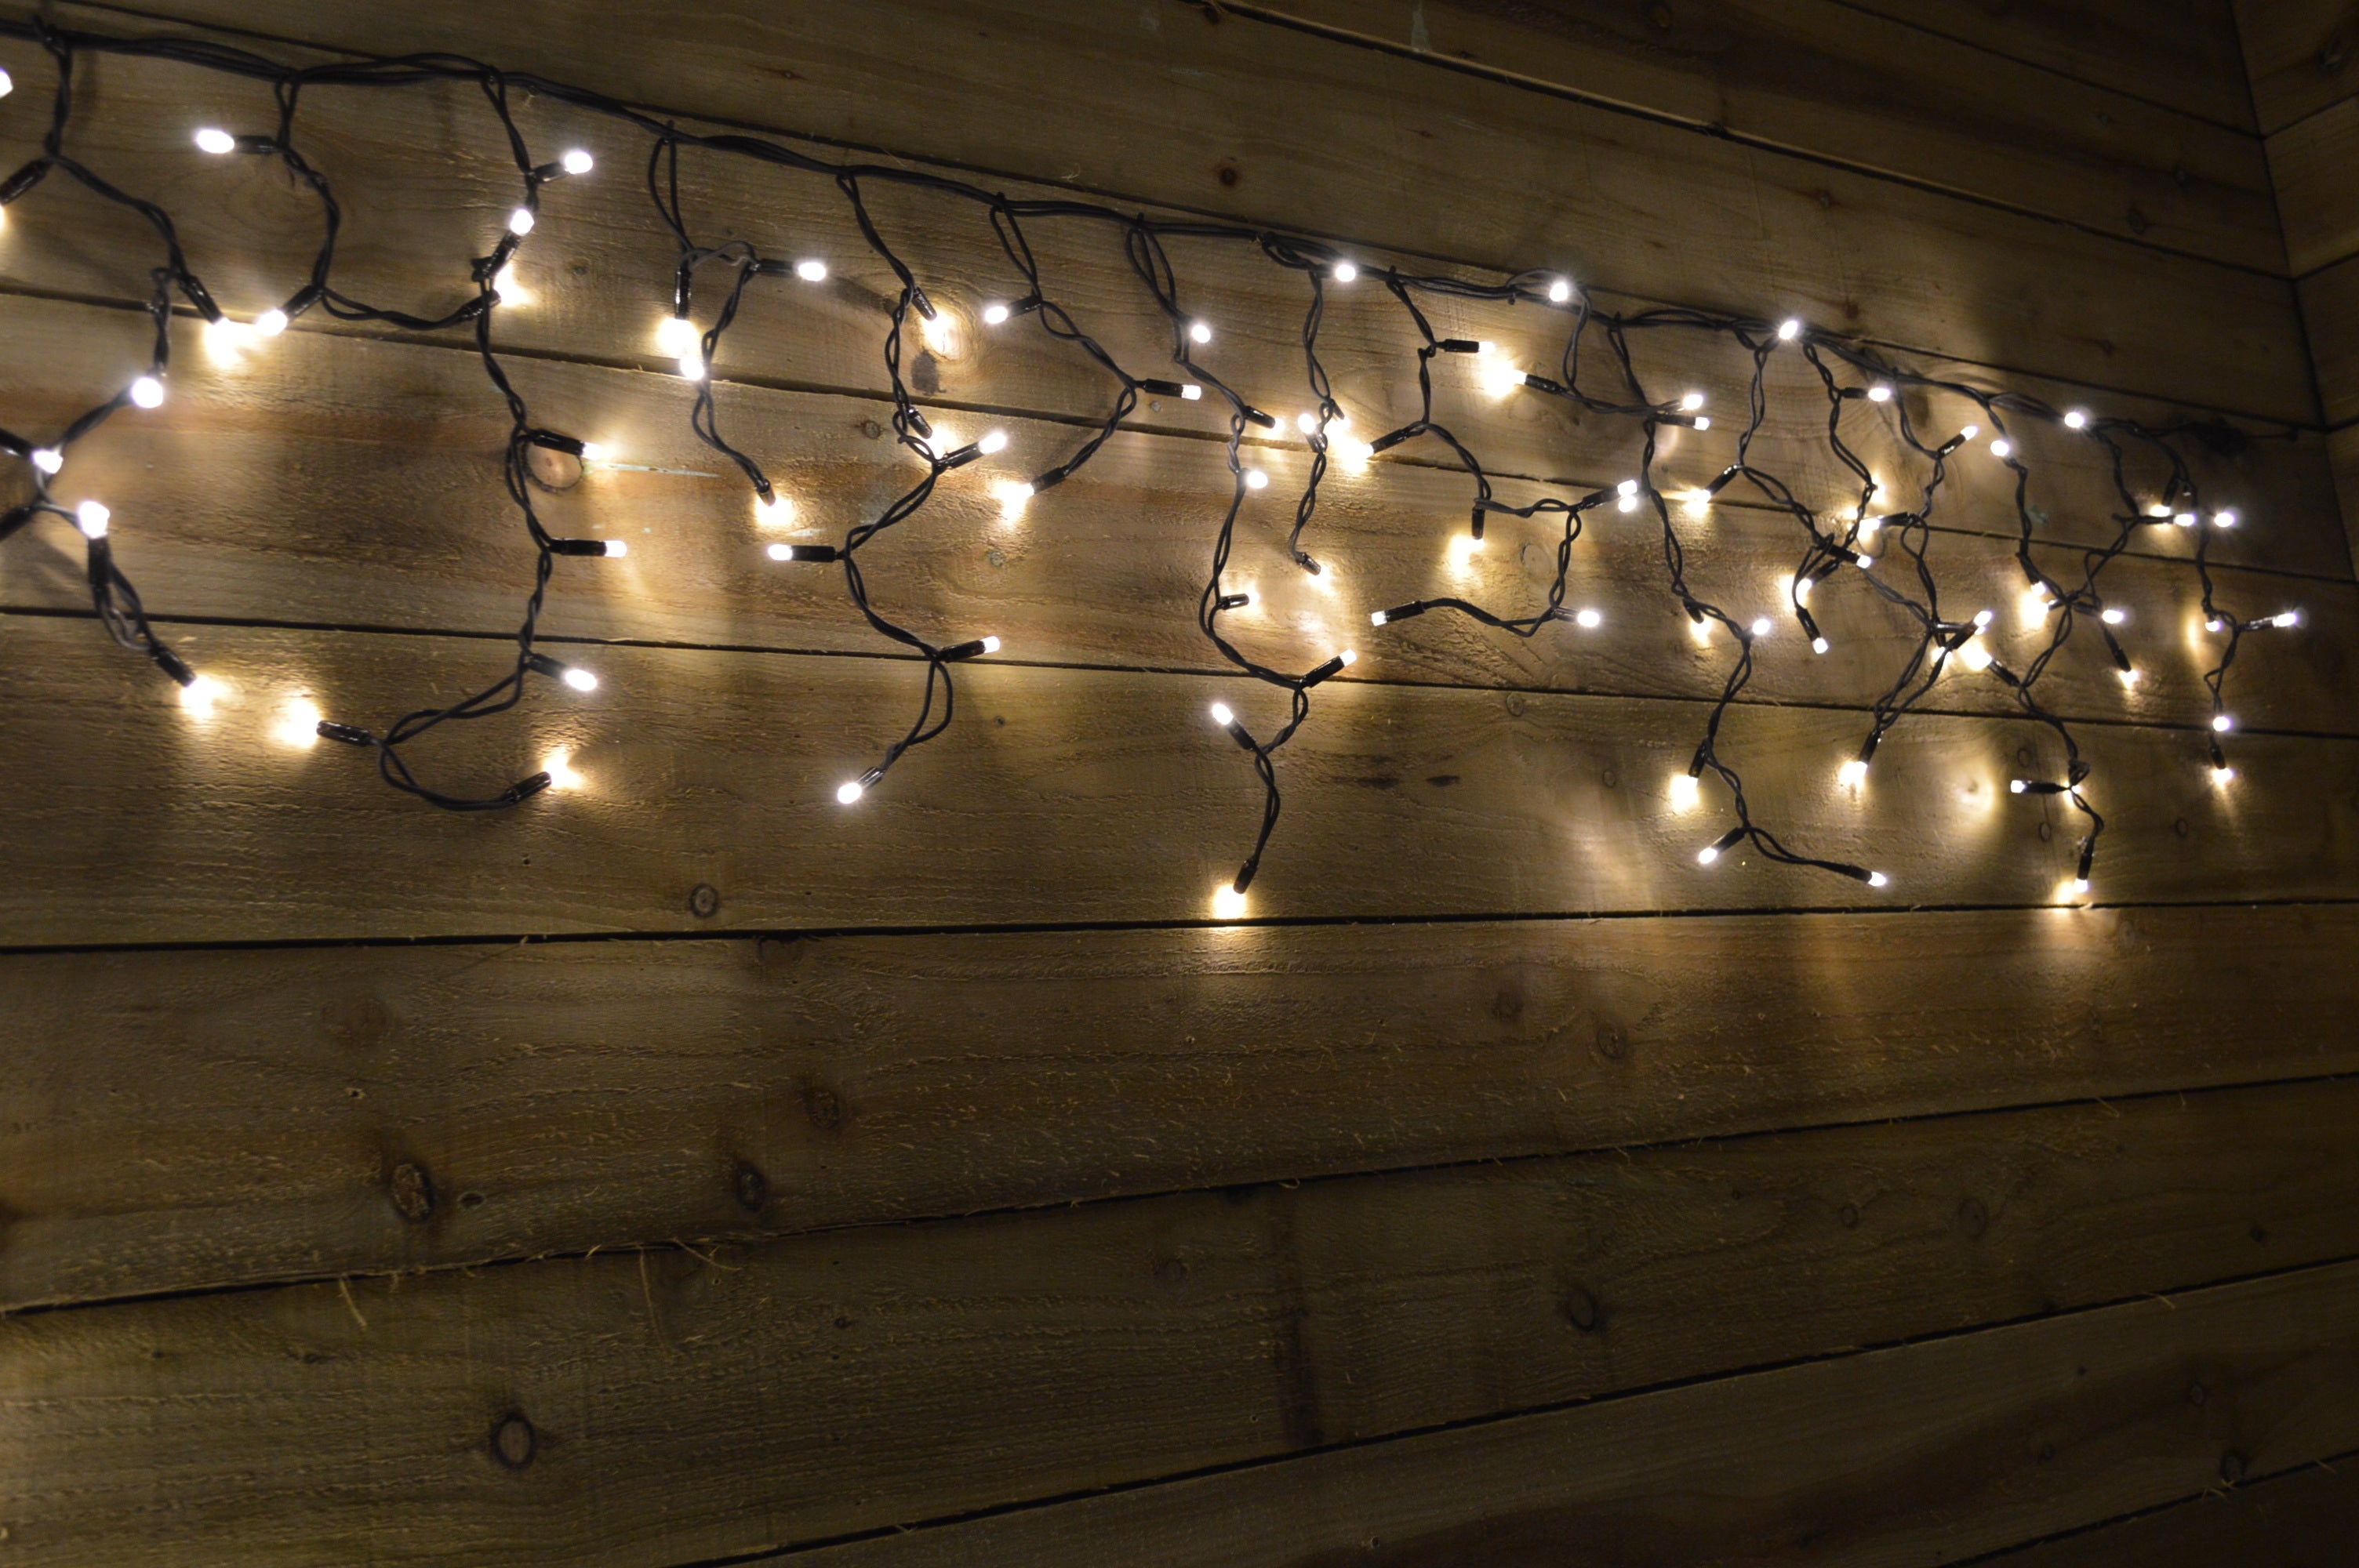 300 LED (6m) Warm White Connectable Icicle Lights on a Black Cable